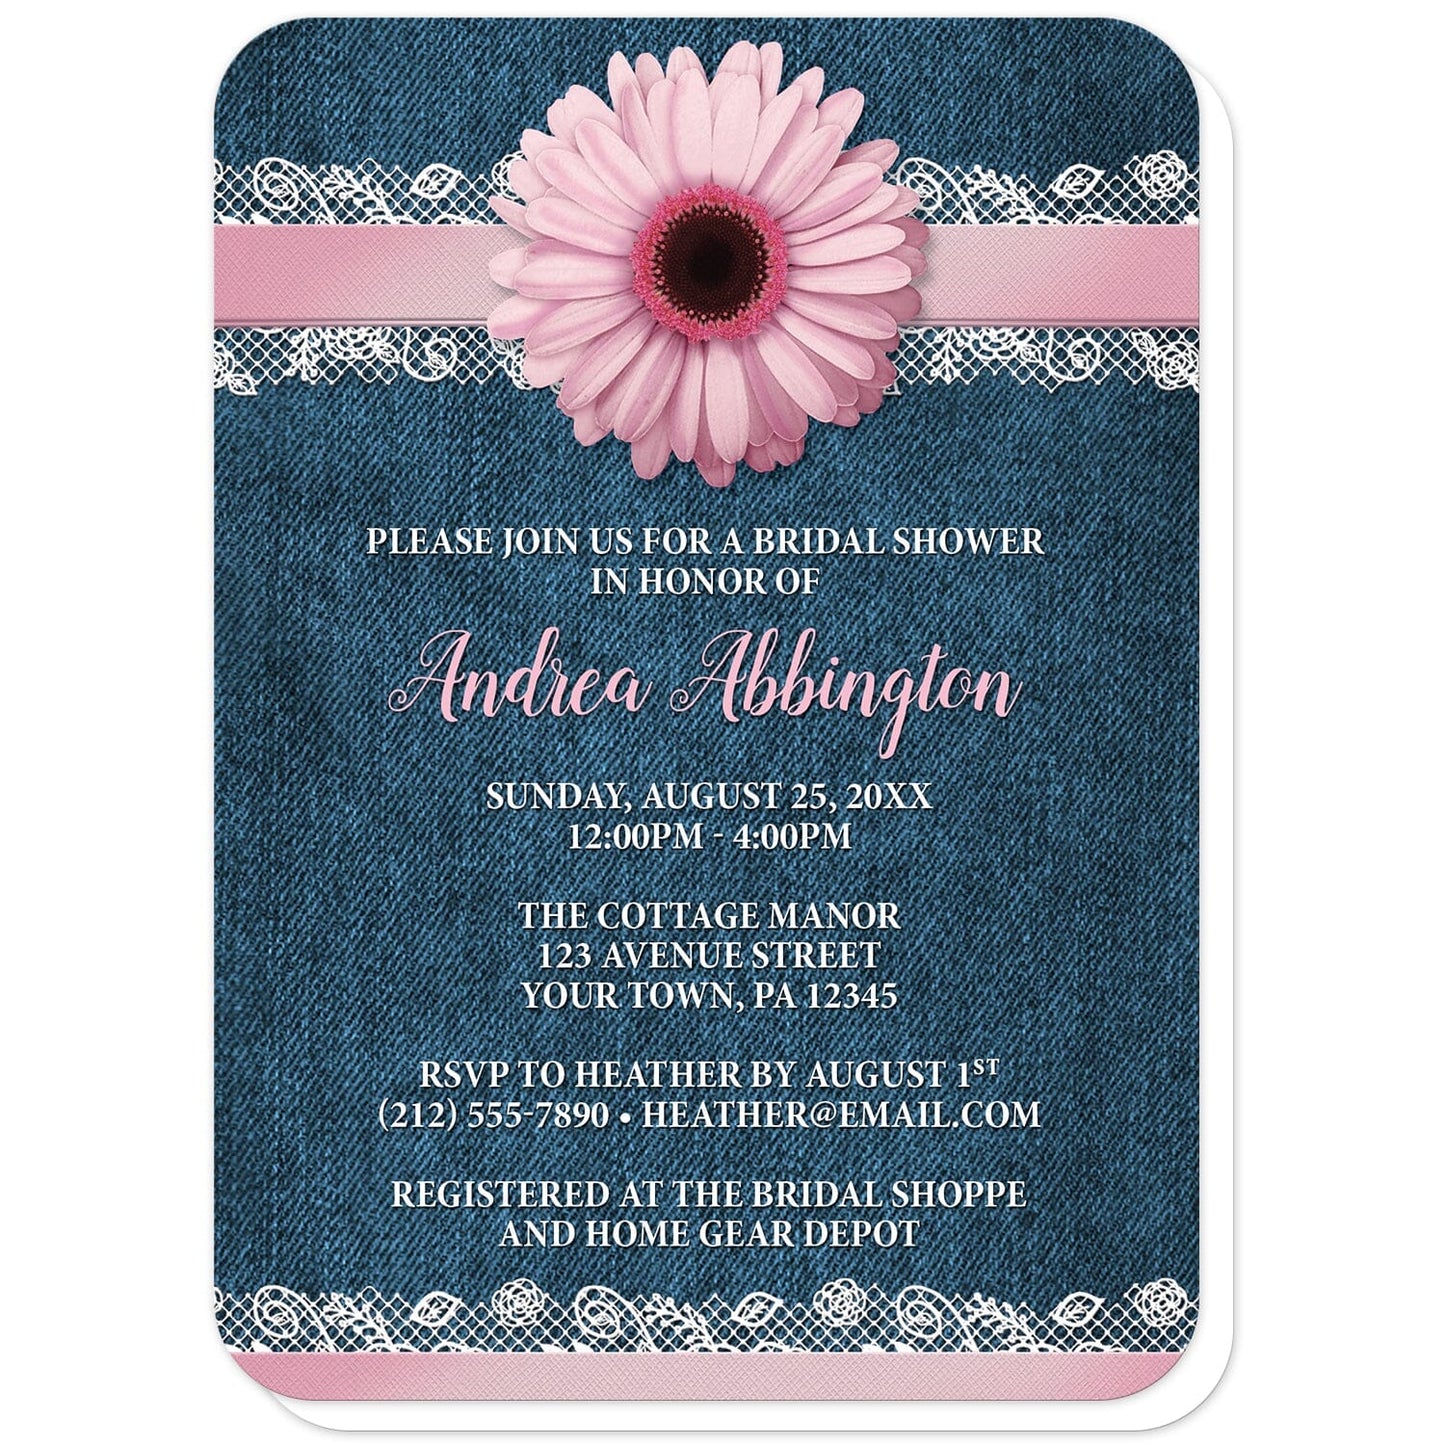 Pink Daisy Lace Rustic Denim Bridal Shower Invitations (with rounded corners) at Artistically Invited. Southern-inspired pink daisy lace rustic denim bridal shower invitations with a pink daisy flower image centered at the top on a pink and white lace ribbon illustration. Your personalized bridal shower celebration details are custom printed in pink and white over a country blue denim background.